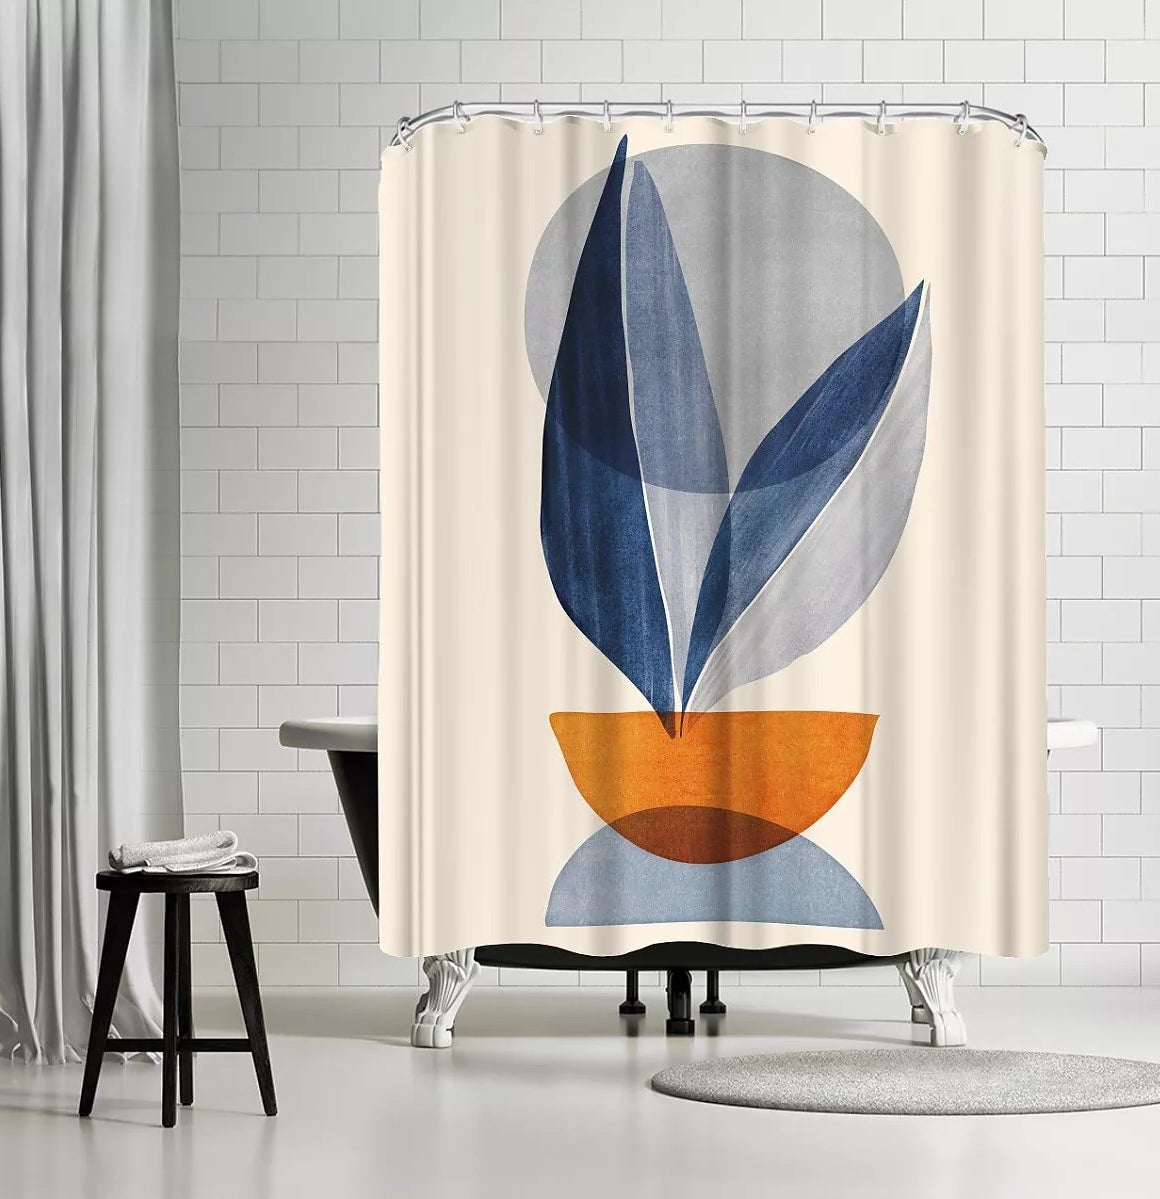 The abstract shapes shower curtain